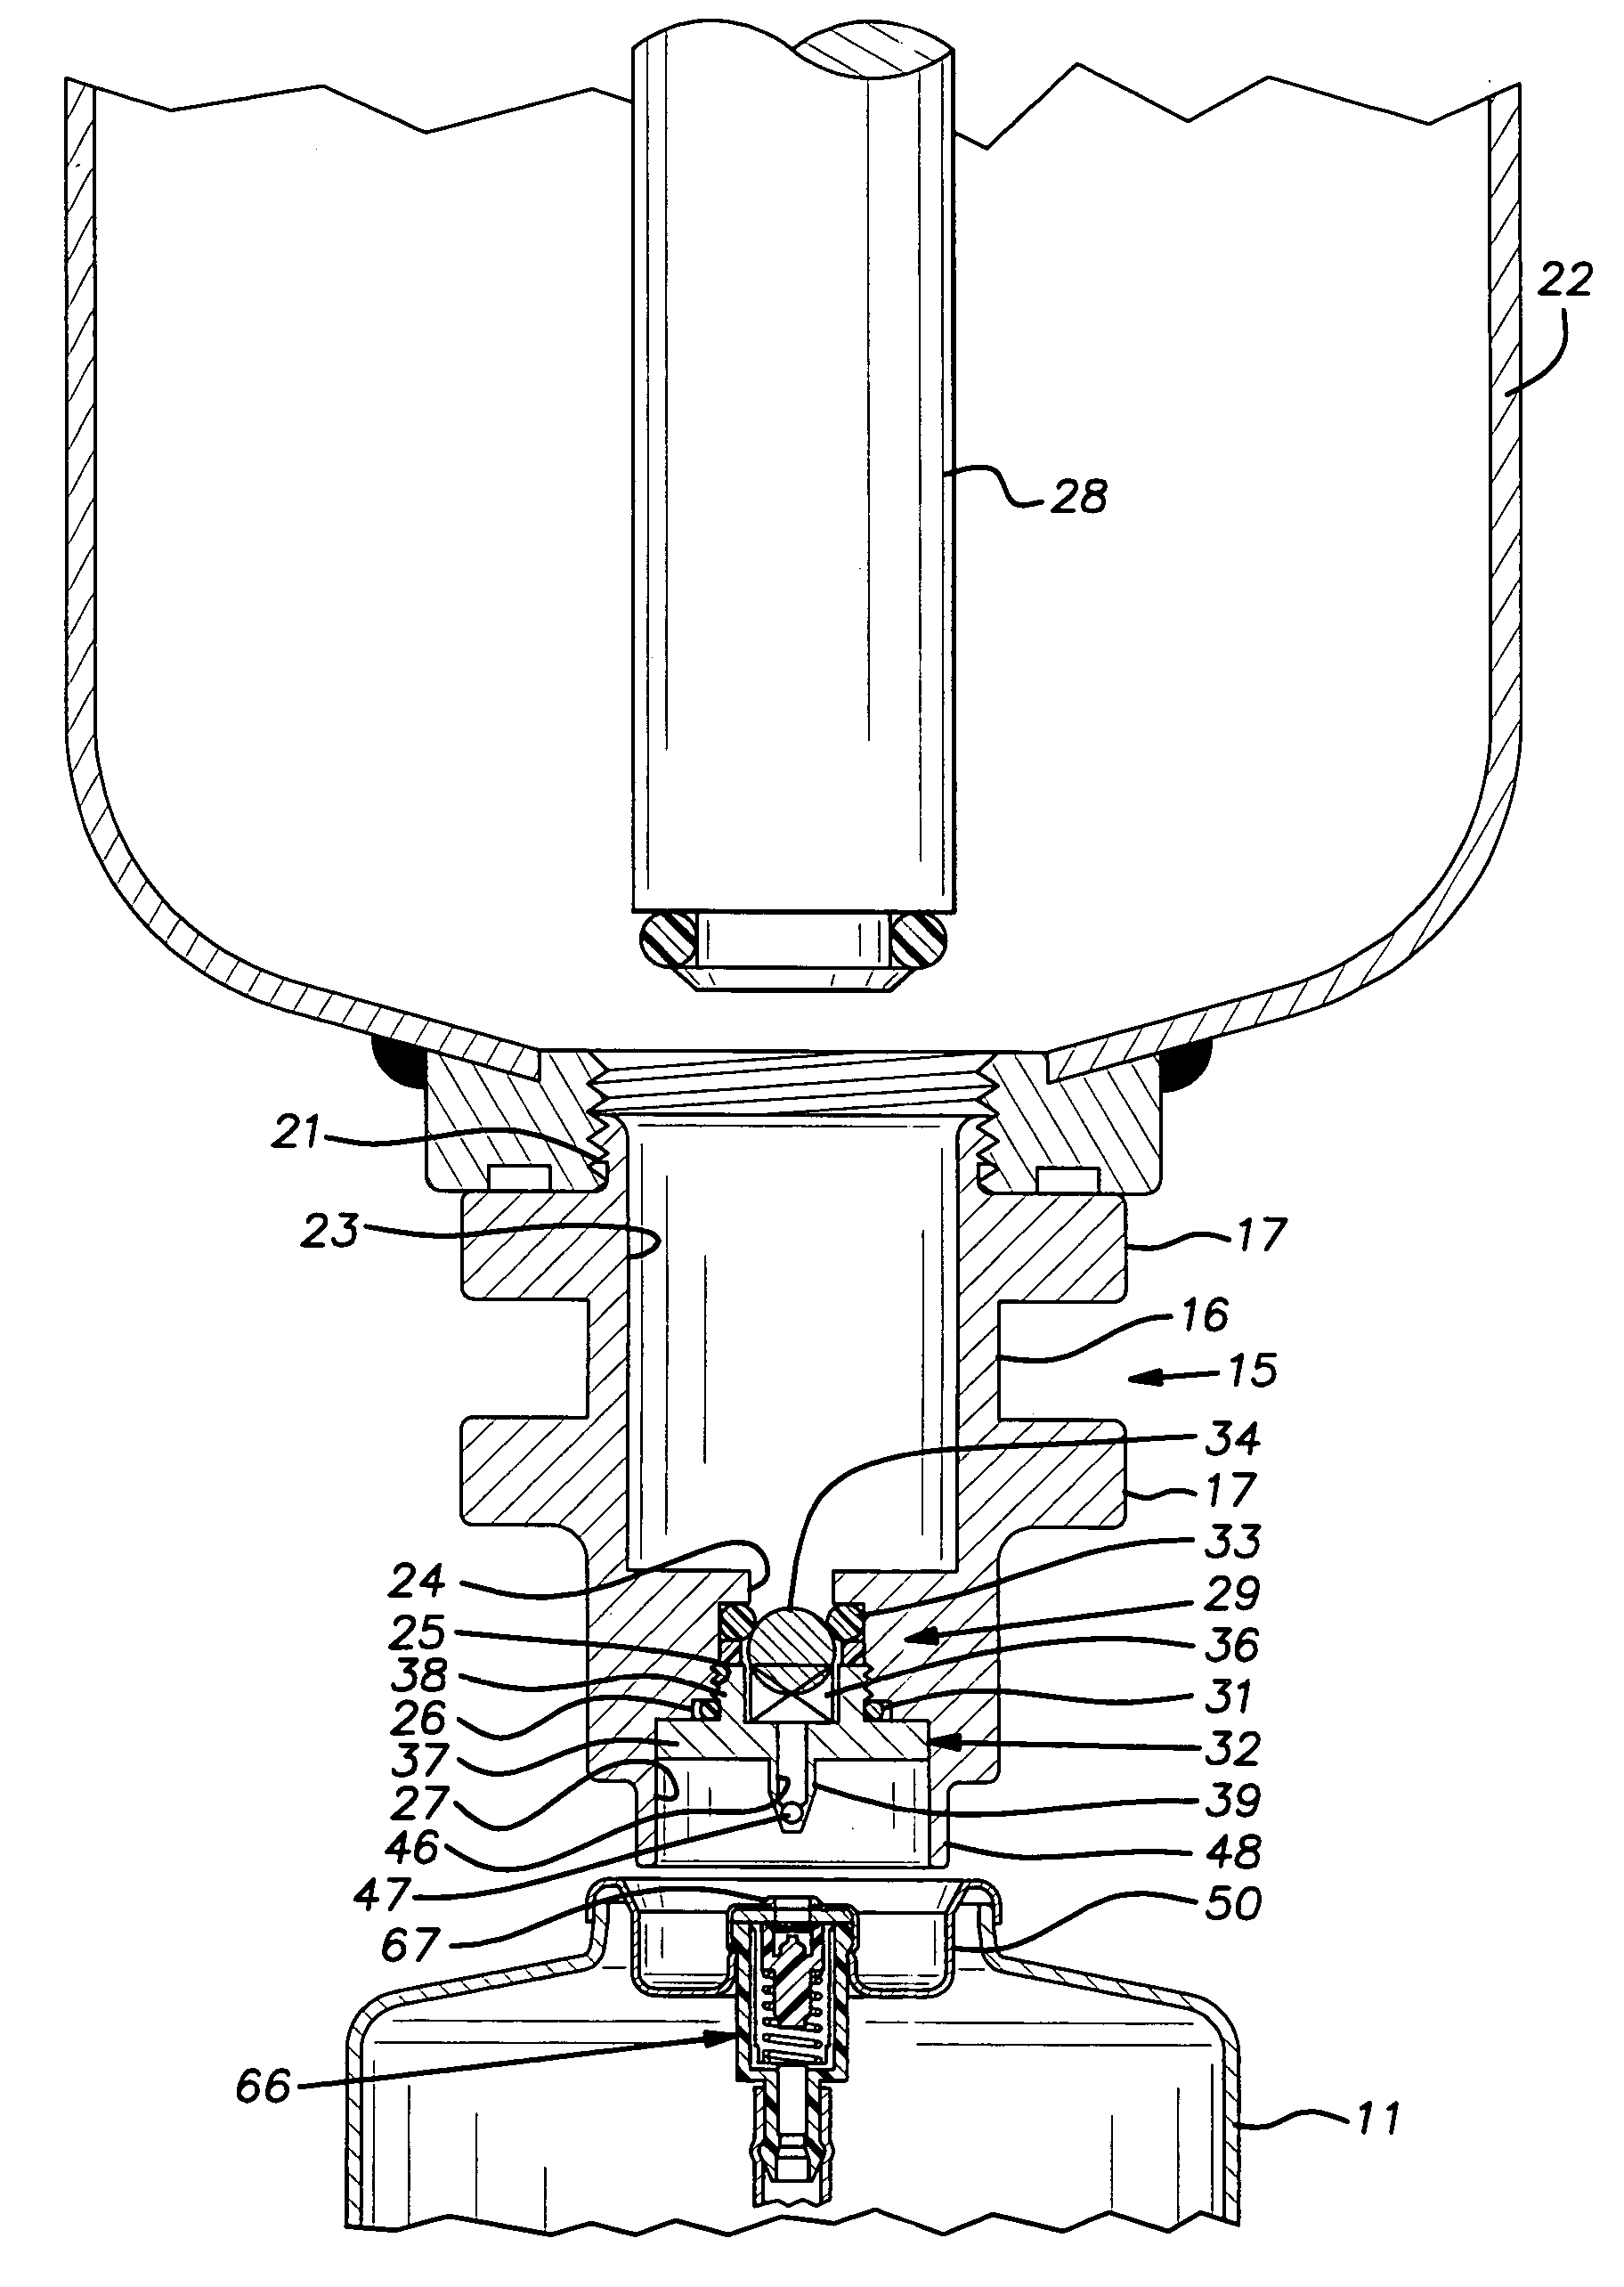 Apparatus for filling charged aerosol cans